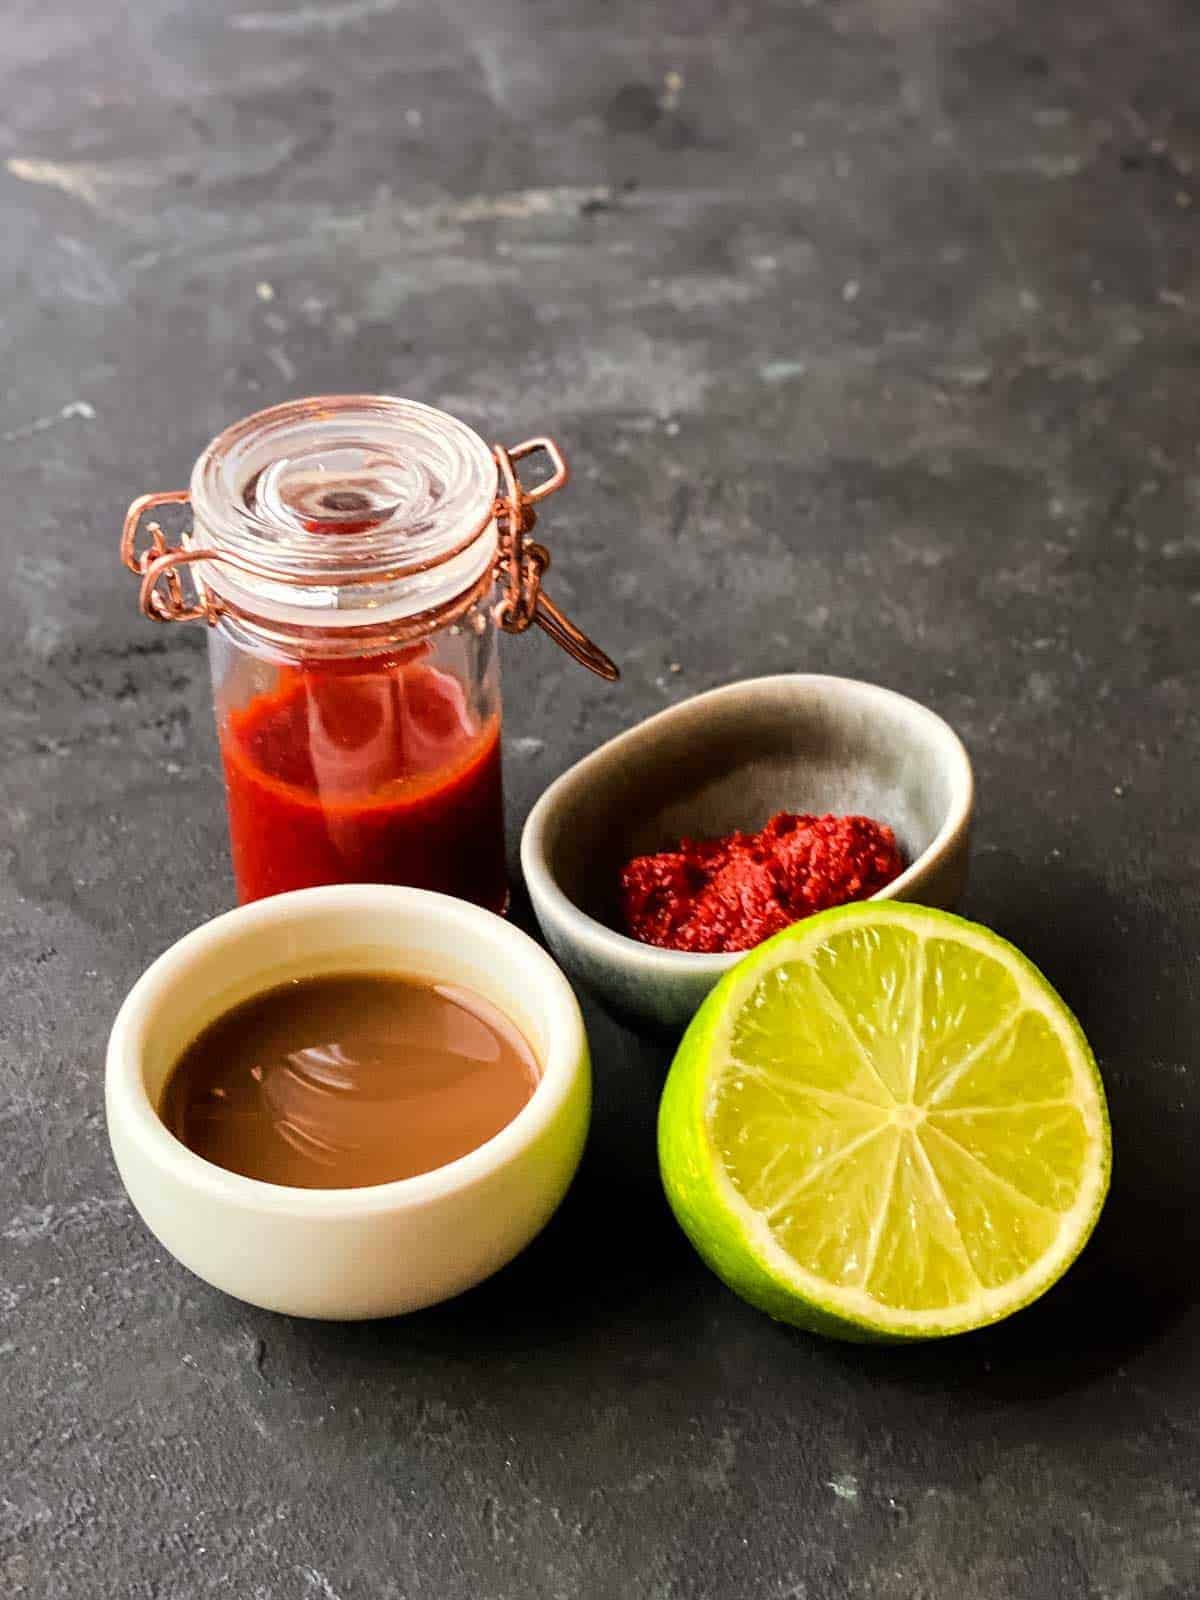 Jar of chilli tamarind dressing recipe with half a lime on the side, a bowl of tamarind and chilli paste.